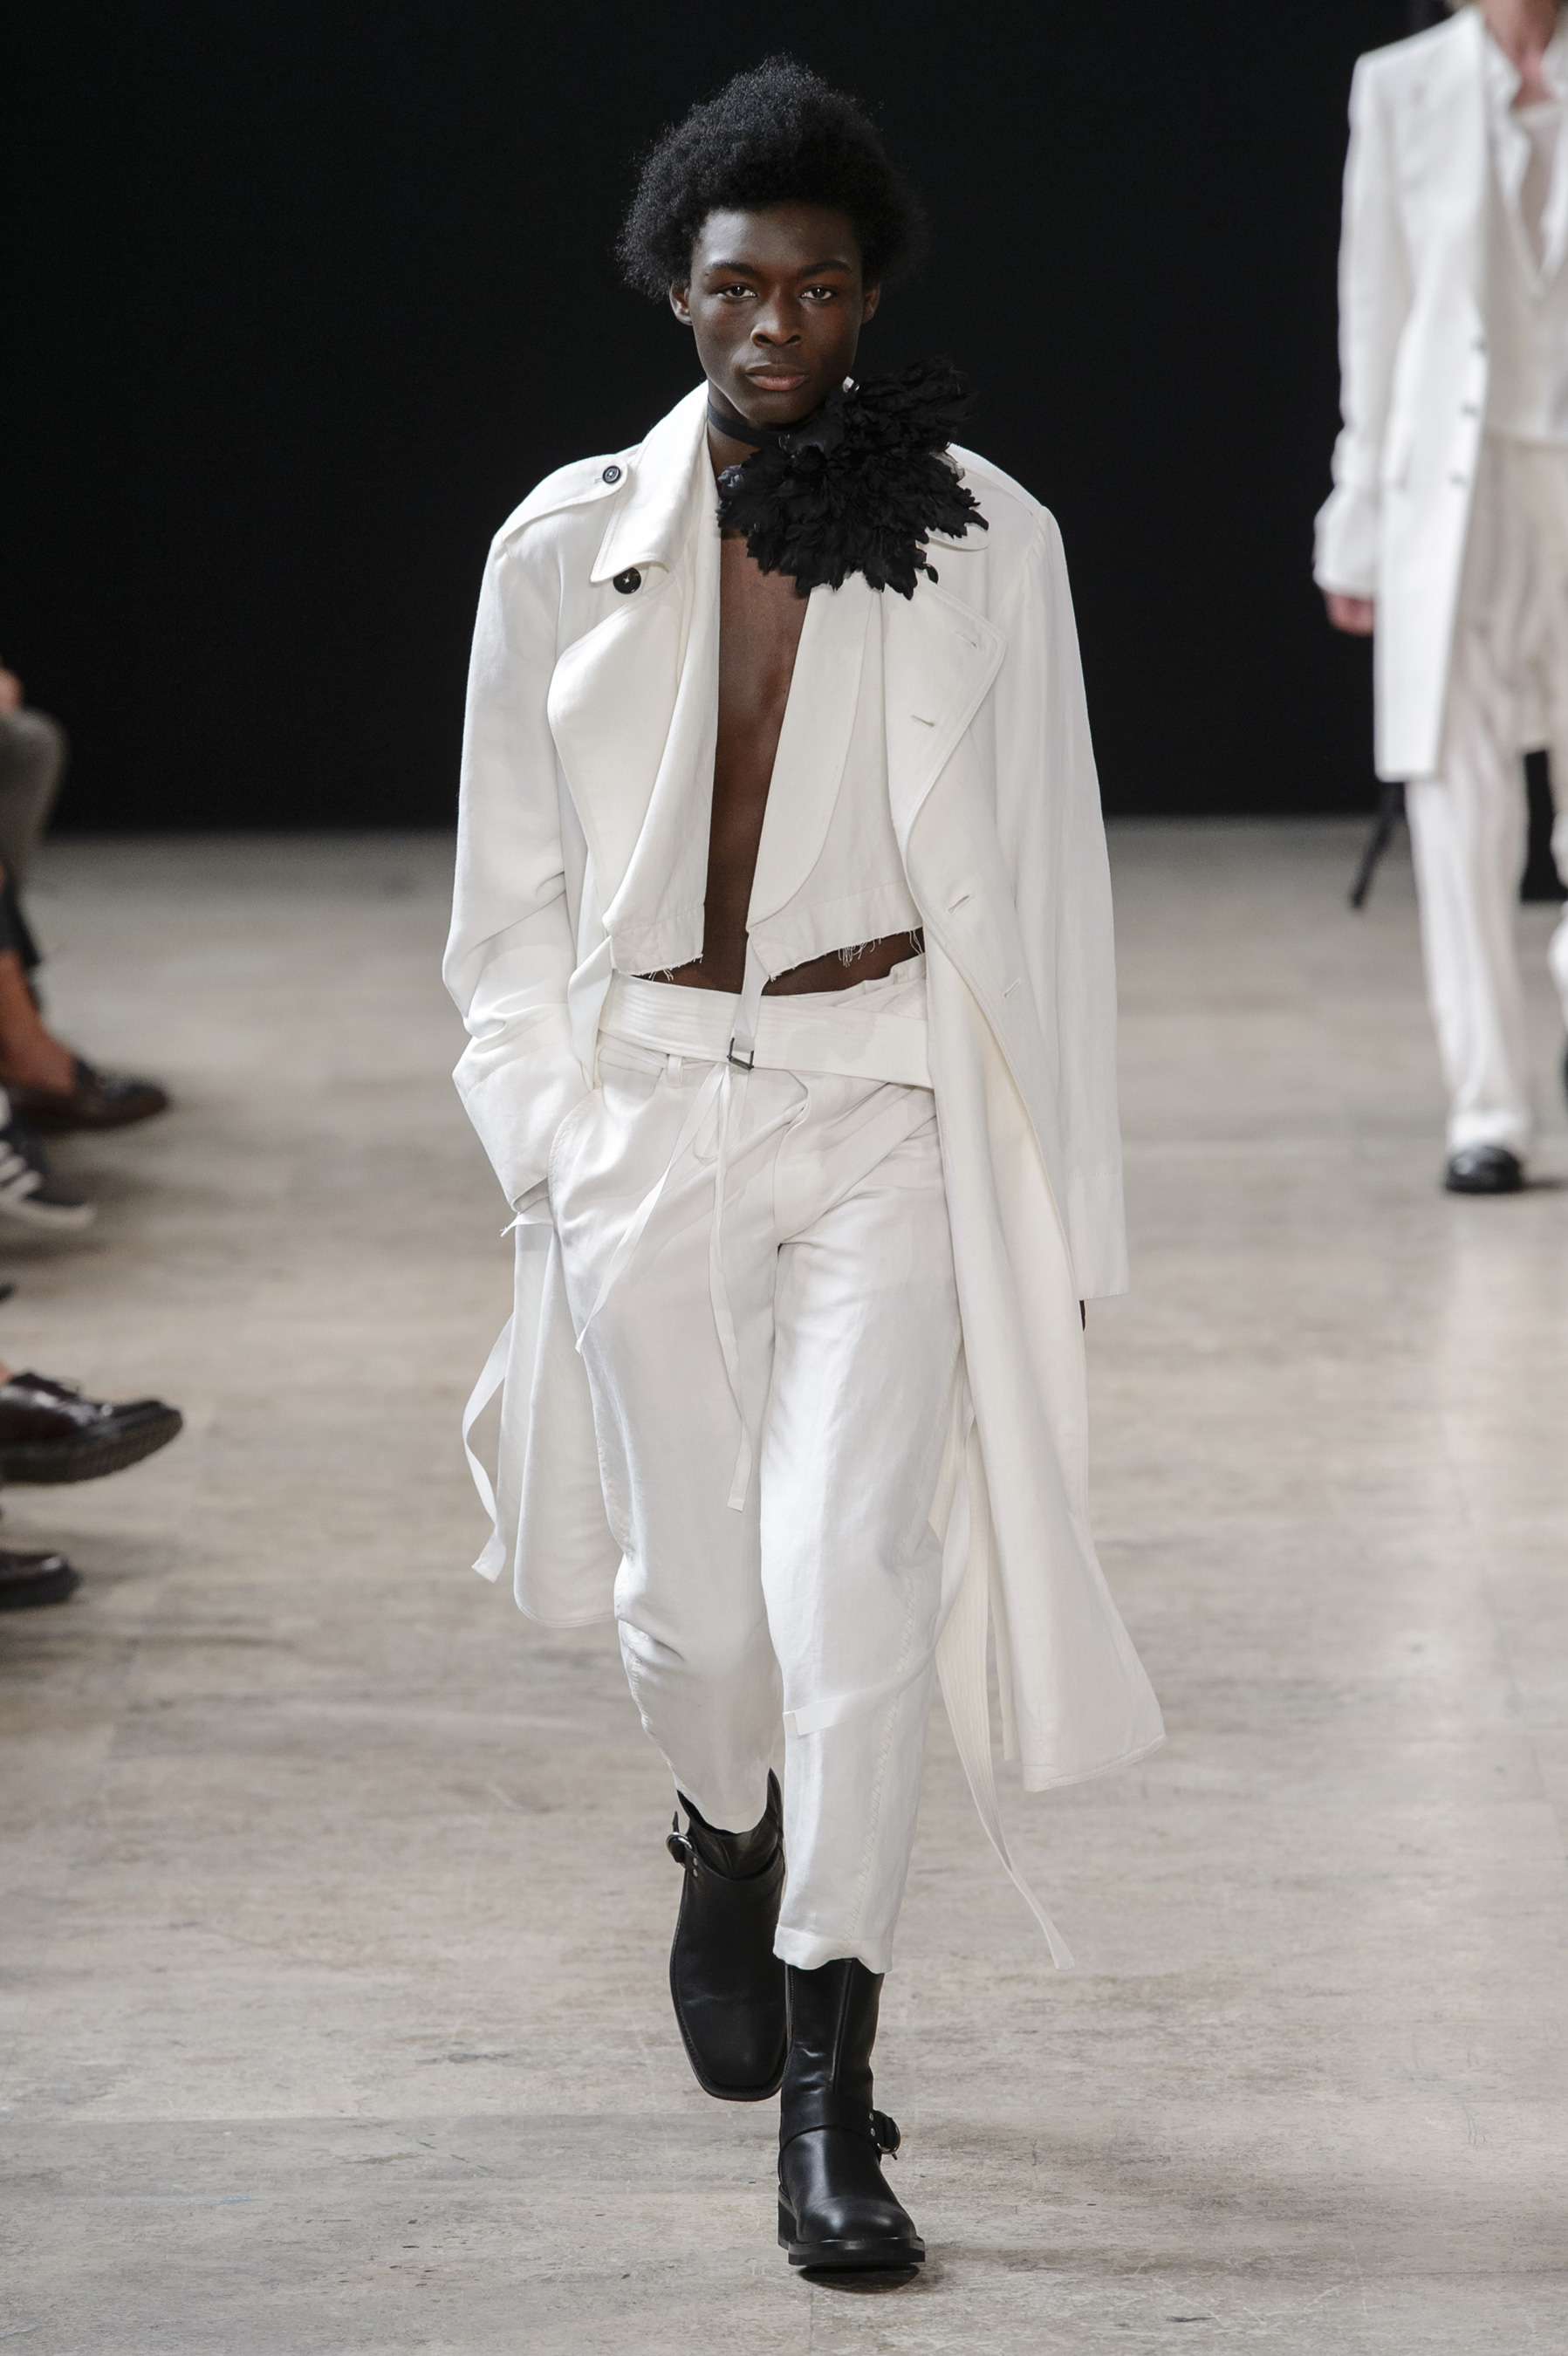 Ann Demeulemeester Spring 2018 Men's Fashion Show - The Impression